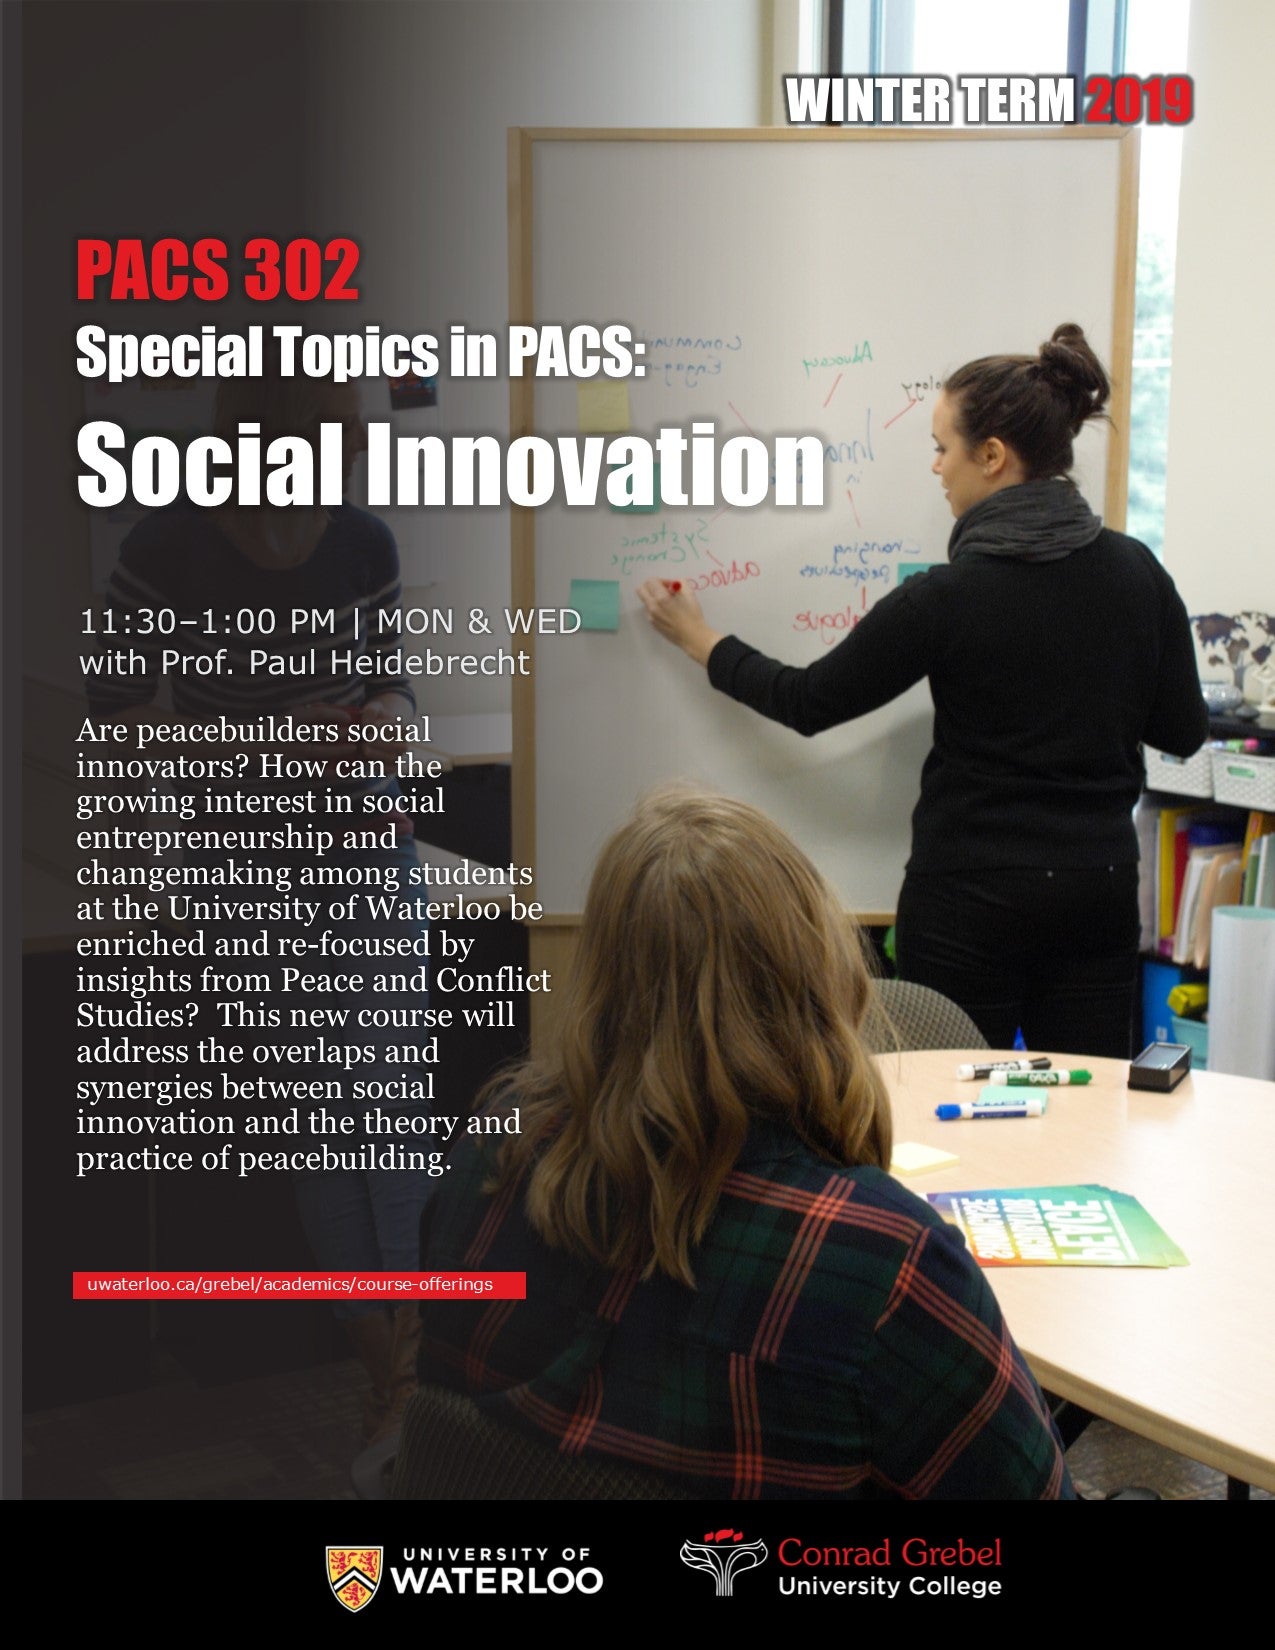 Poster for PACS 302. Features a woman wriiting at a white board. Also includes information about the course.